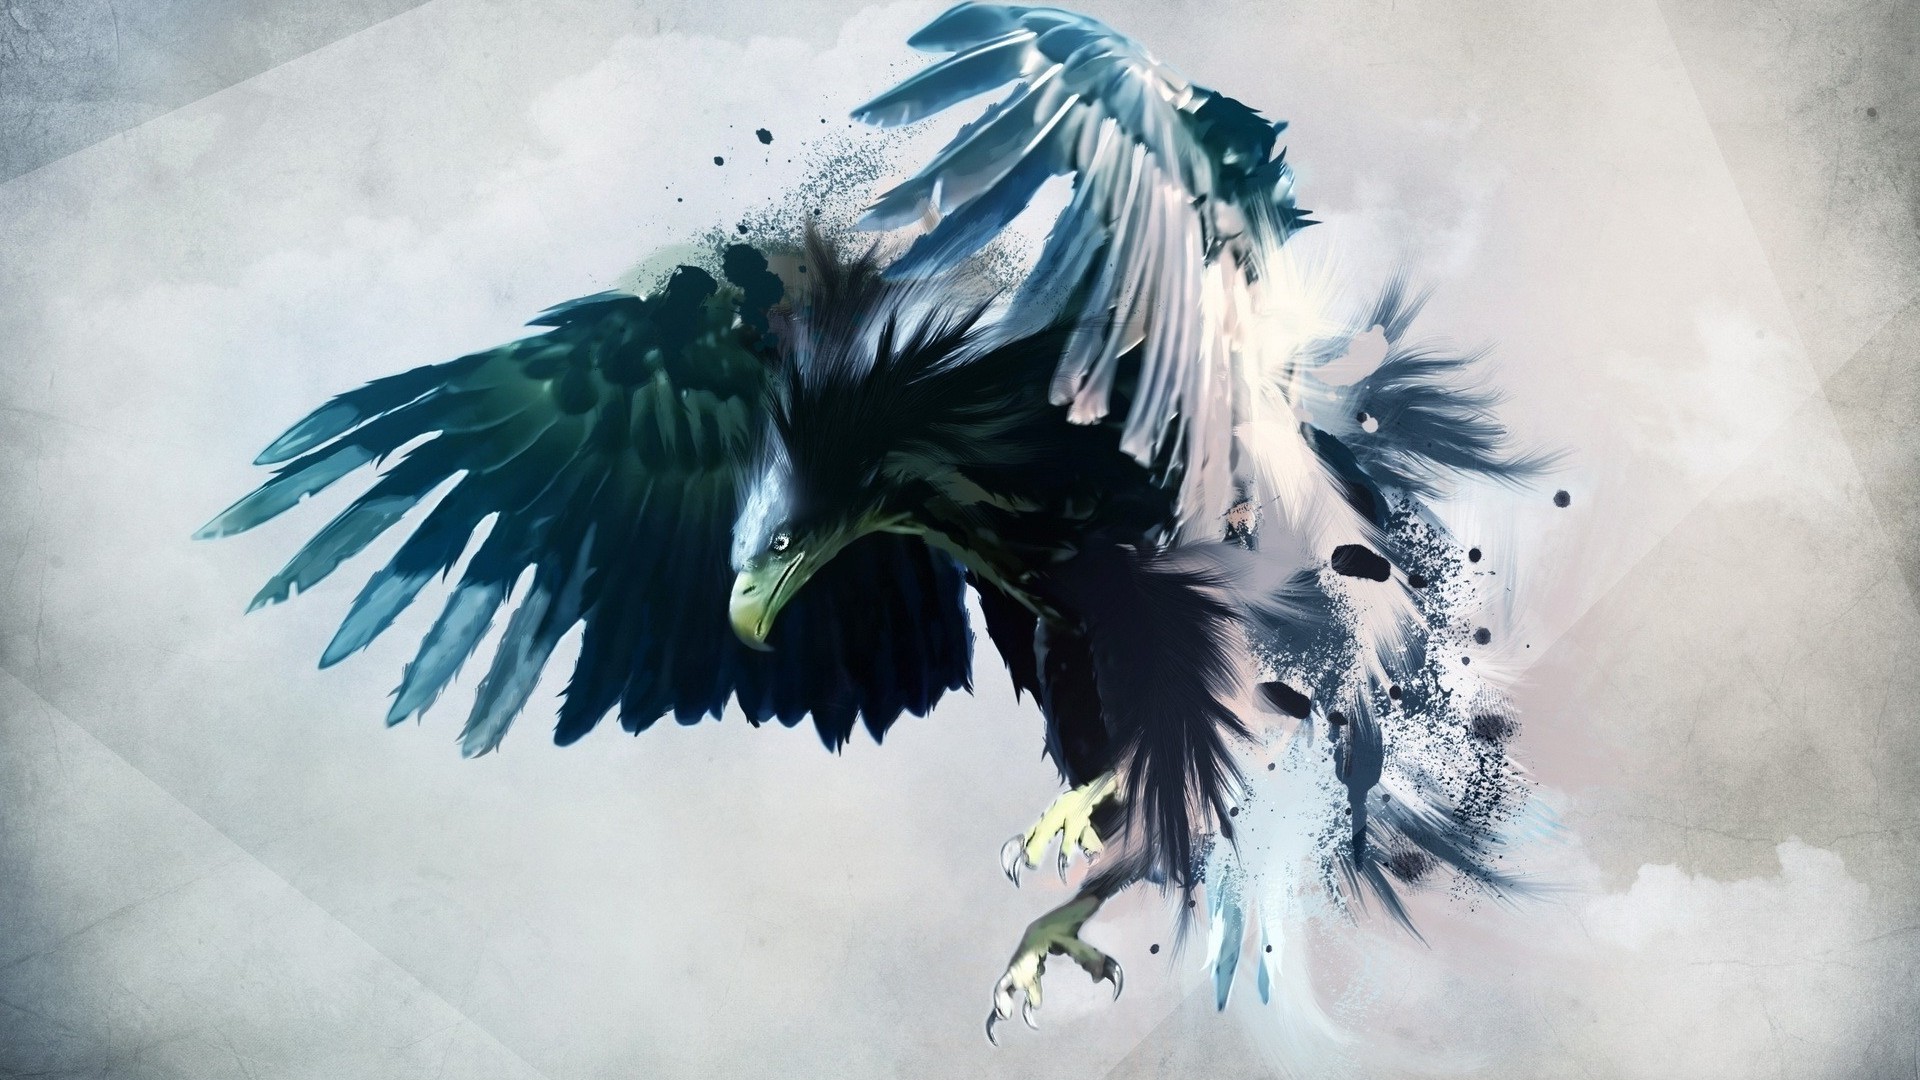 Backgrounds Eagles Football HD With Resolution 1920X1080 pixel. You can make this wallpaper for your Mac or Windows Desktop Background, iPhone, Android or Tablet and another Smartphone device for free